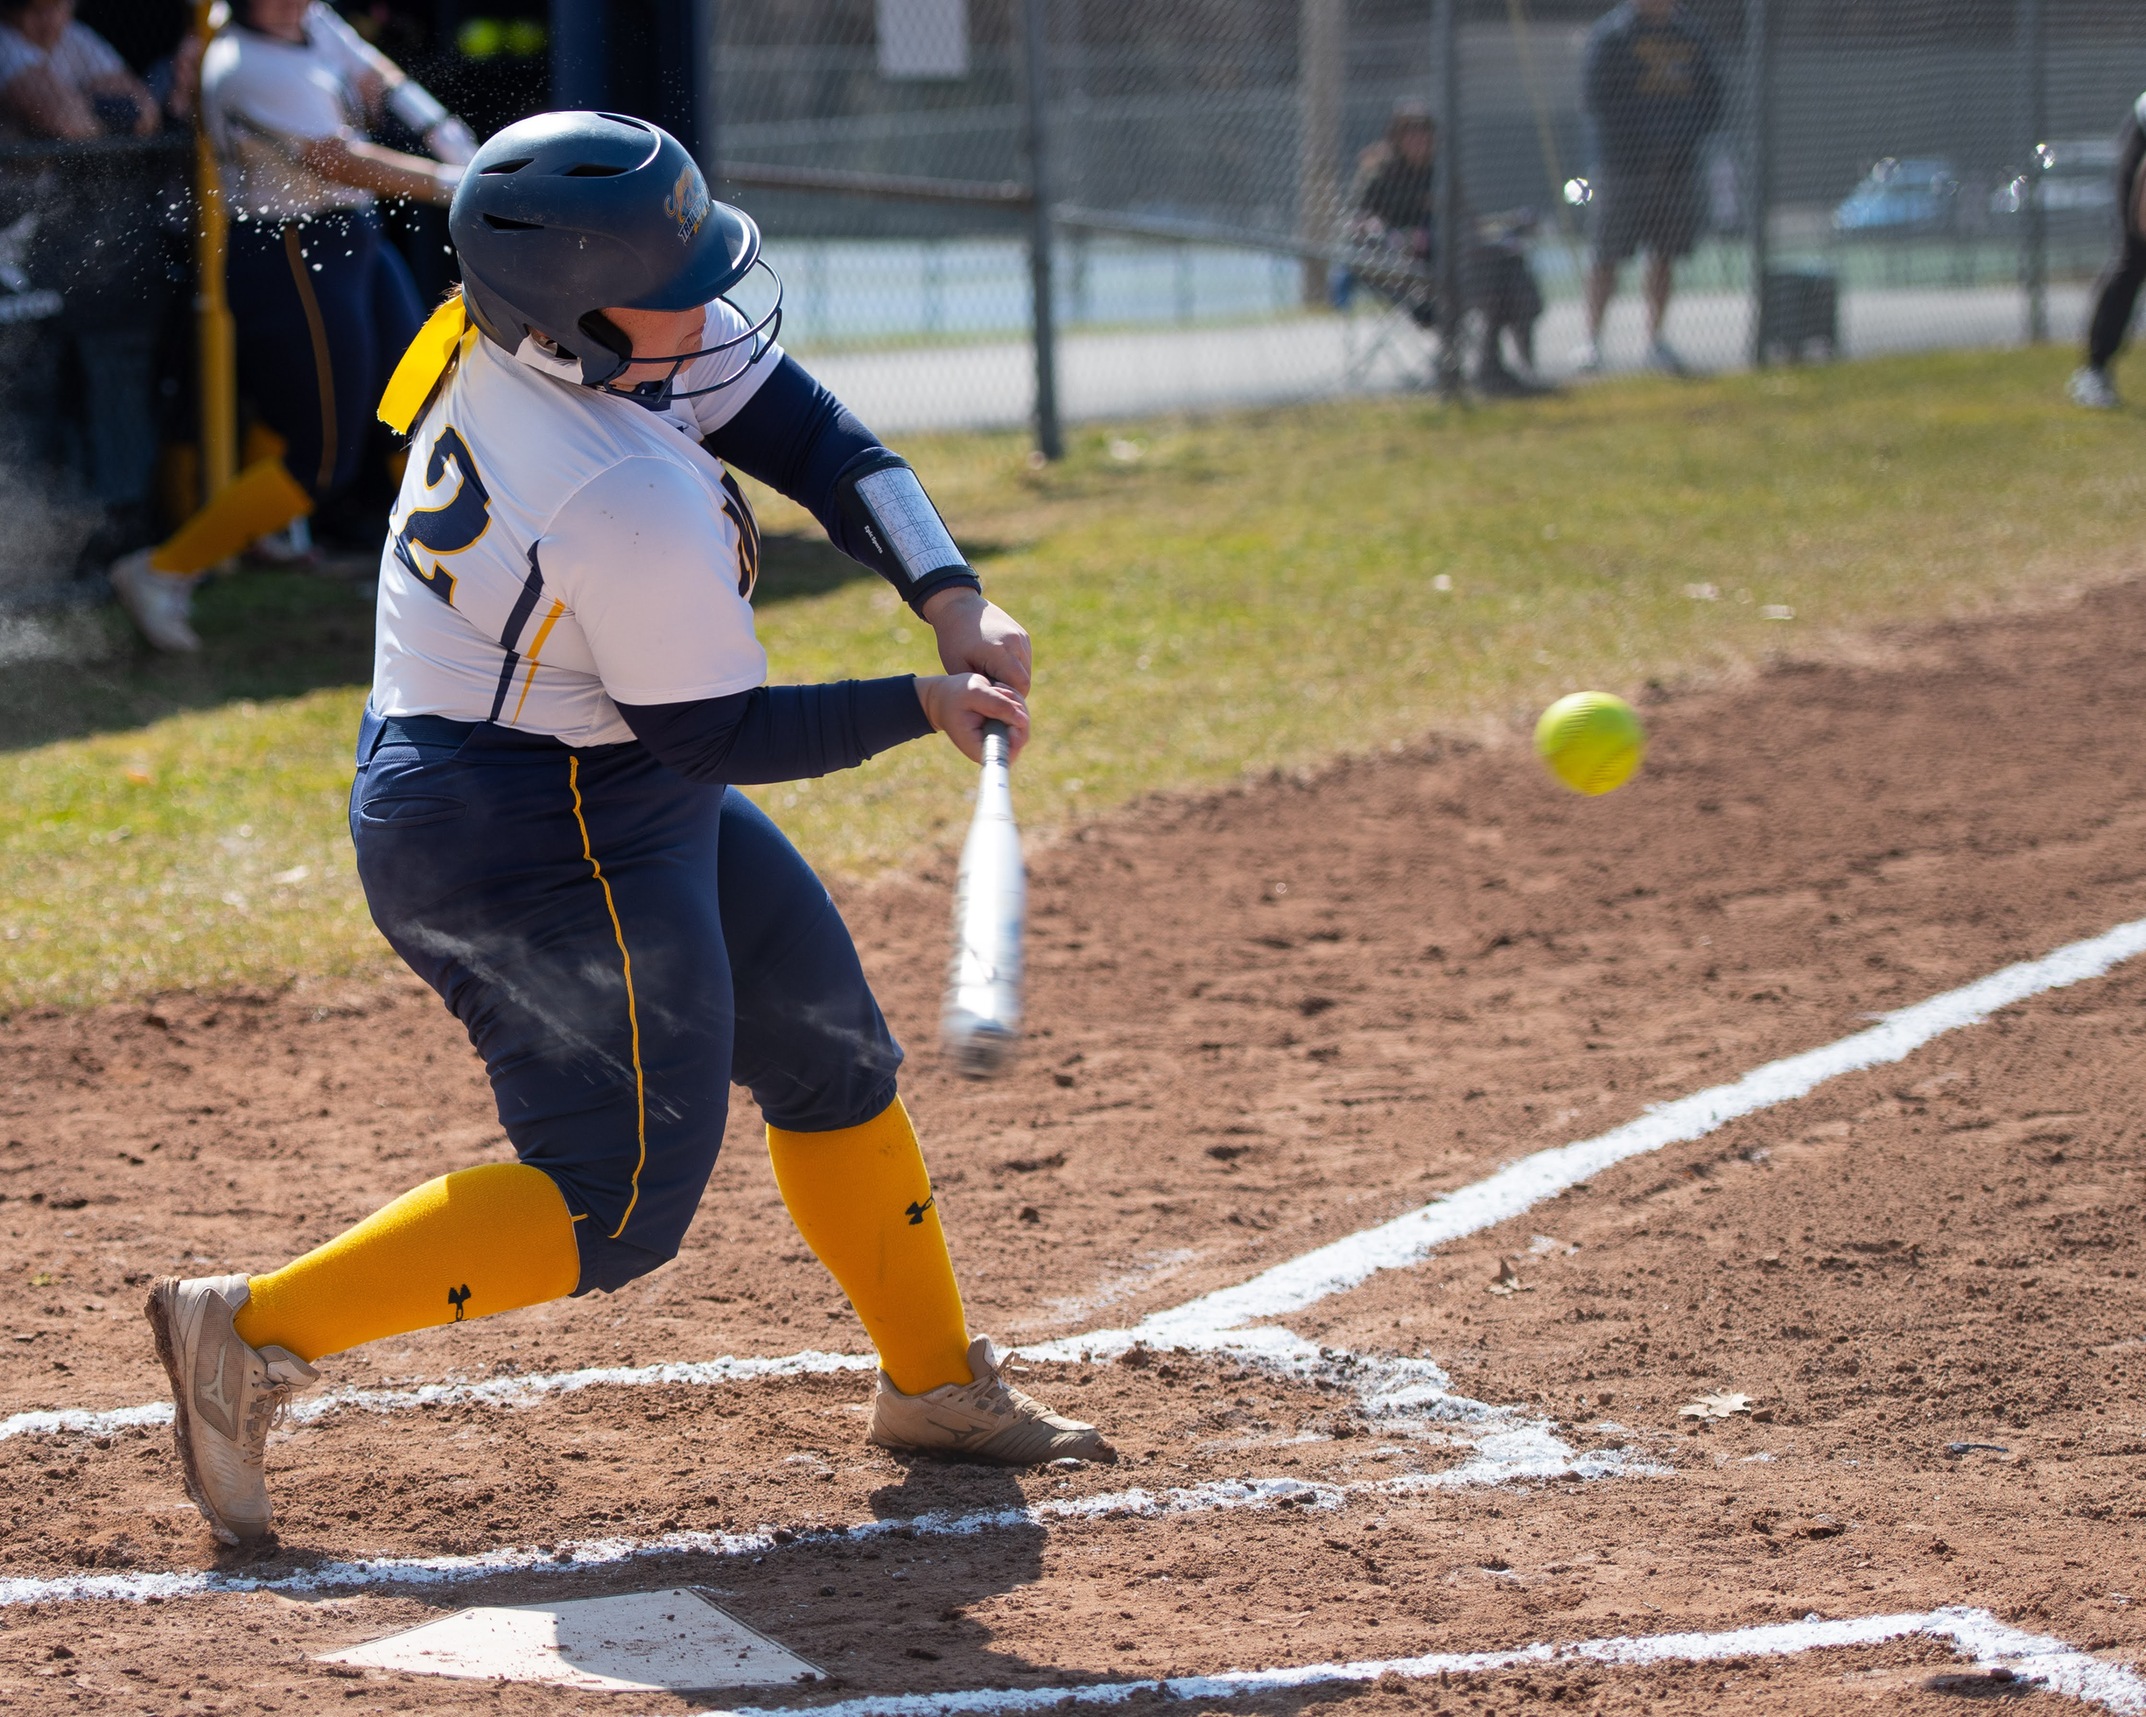 Softball opens up Home schedule with pair of setbacks to Skidmore